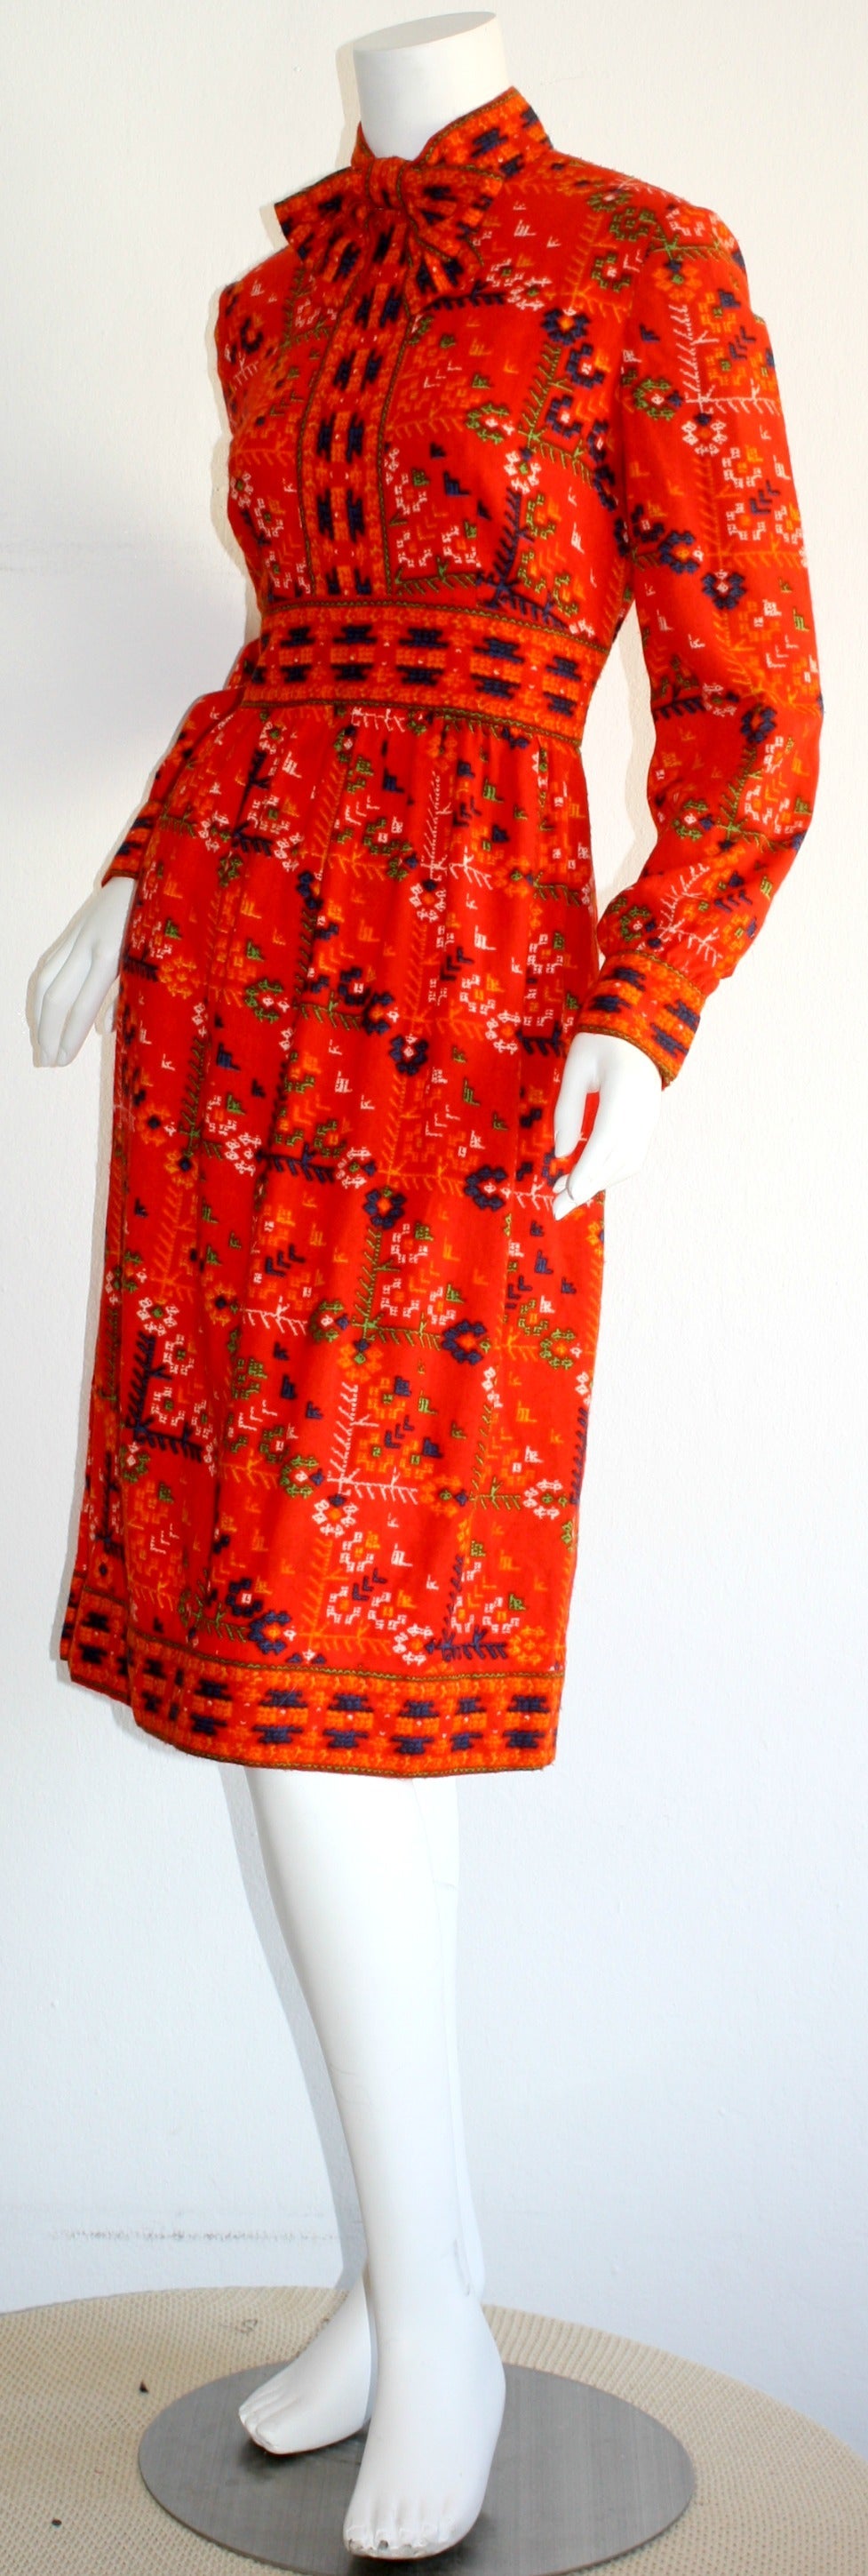 Mollie Parnis 1960s Vintage ' Pussycat ' Red Tribal Bow Dress In Excellent Condition For Sale In San Diego, CA